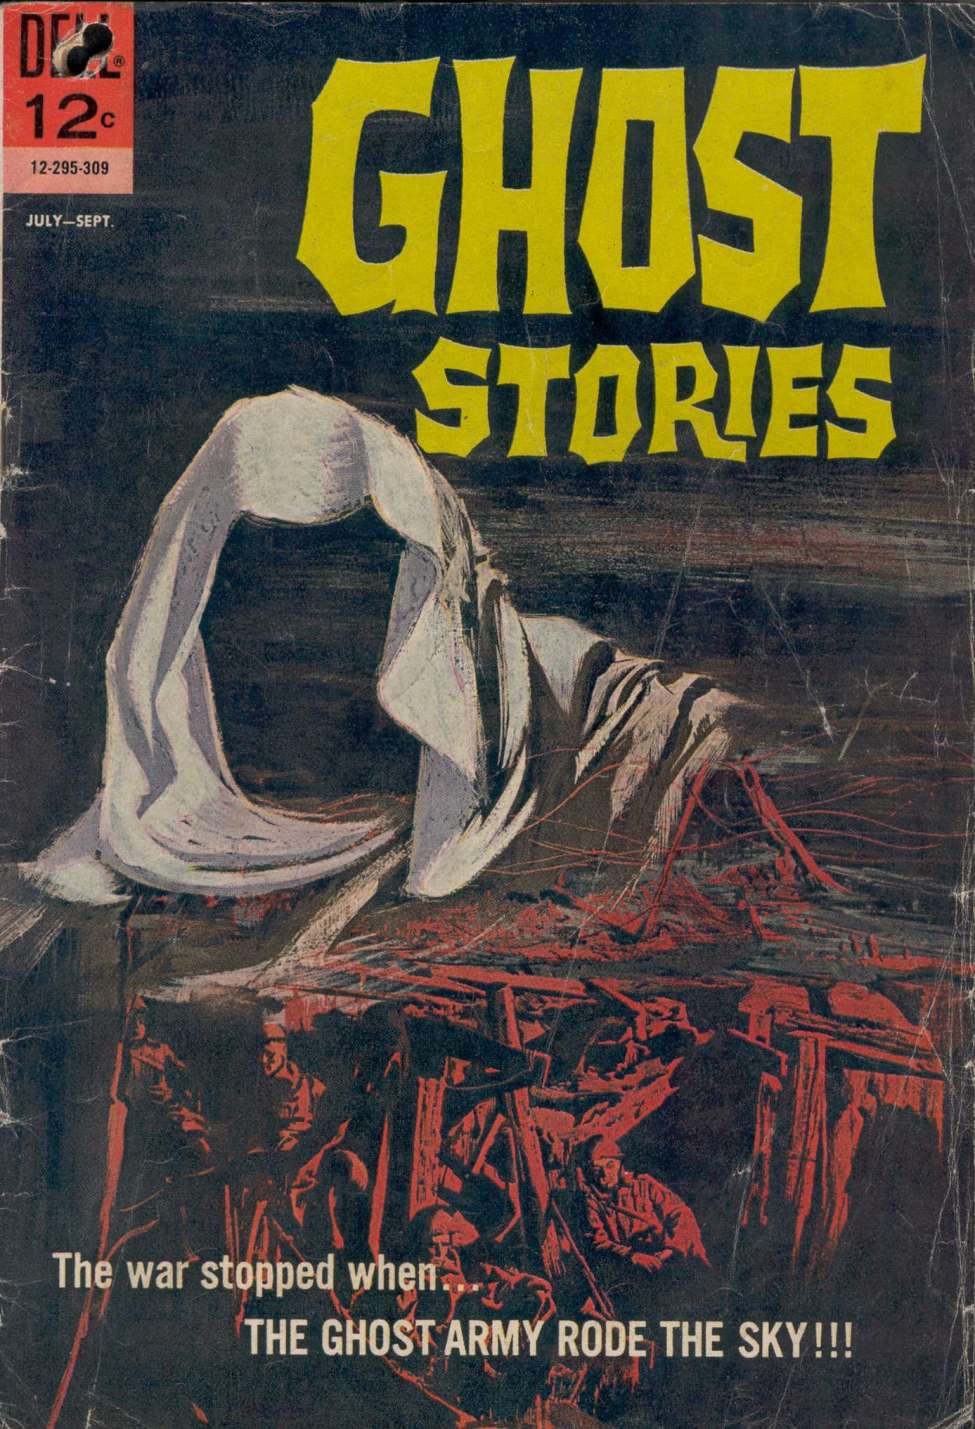 Wrote stories for magazines. Ghost stories (Magazine).